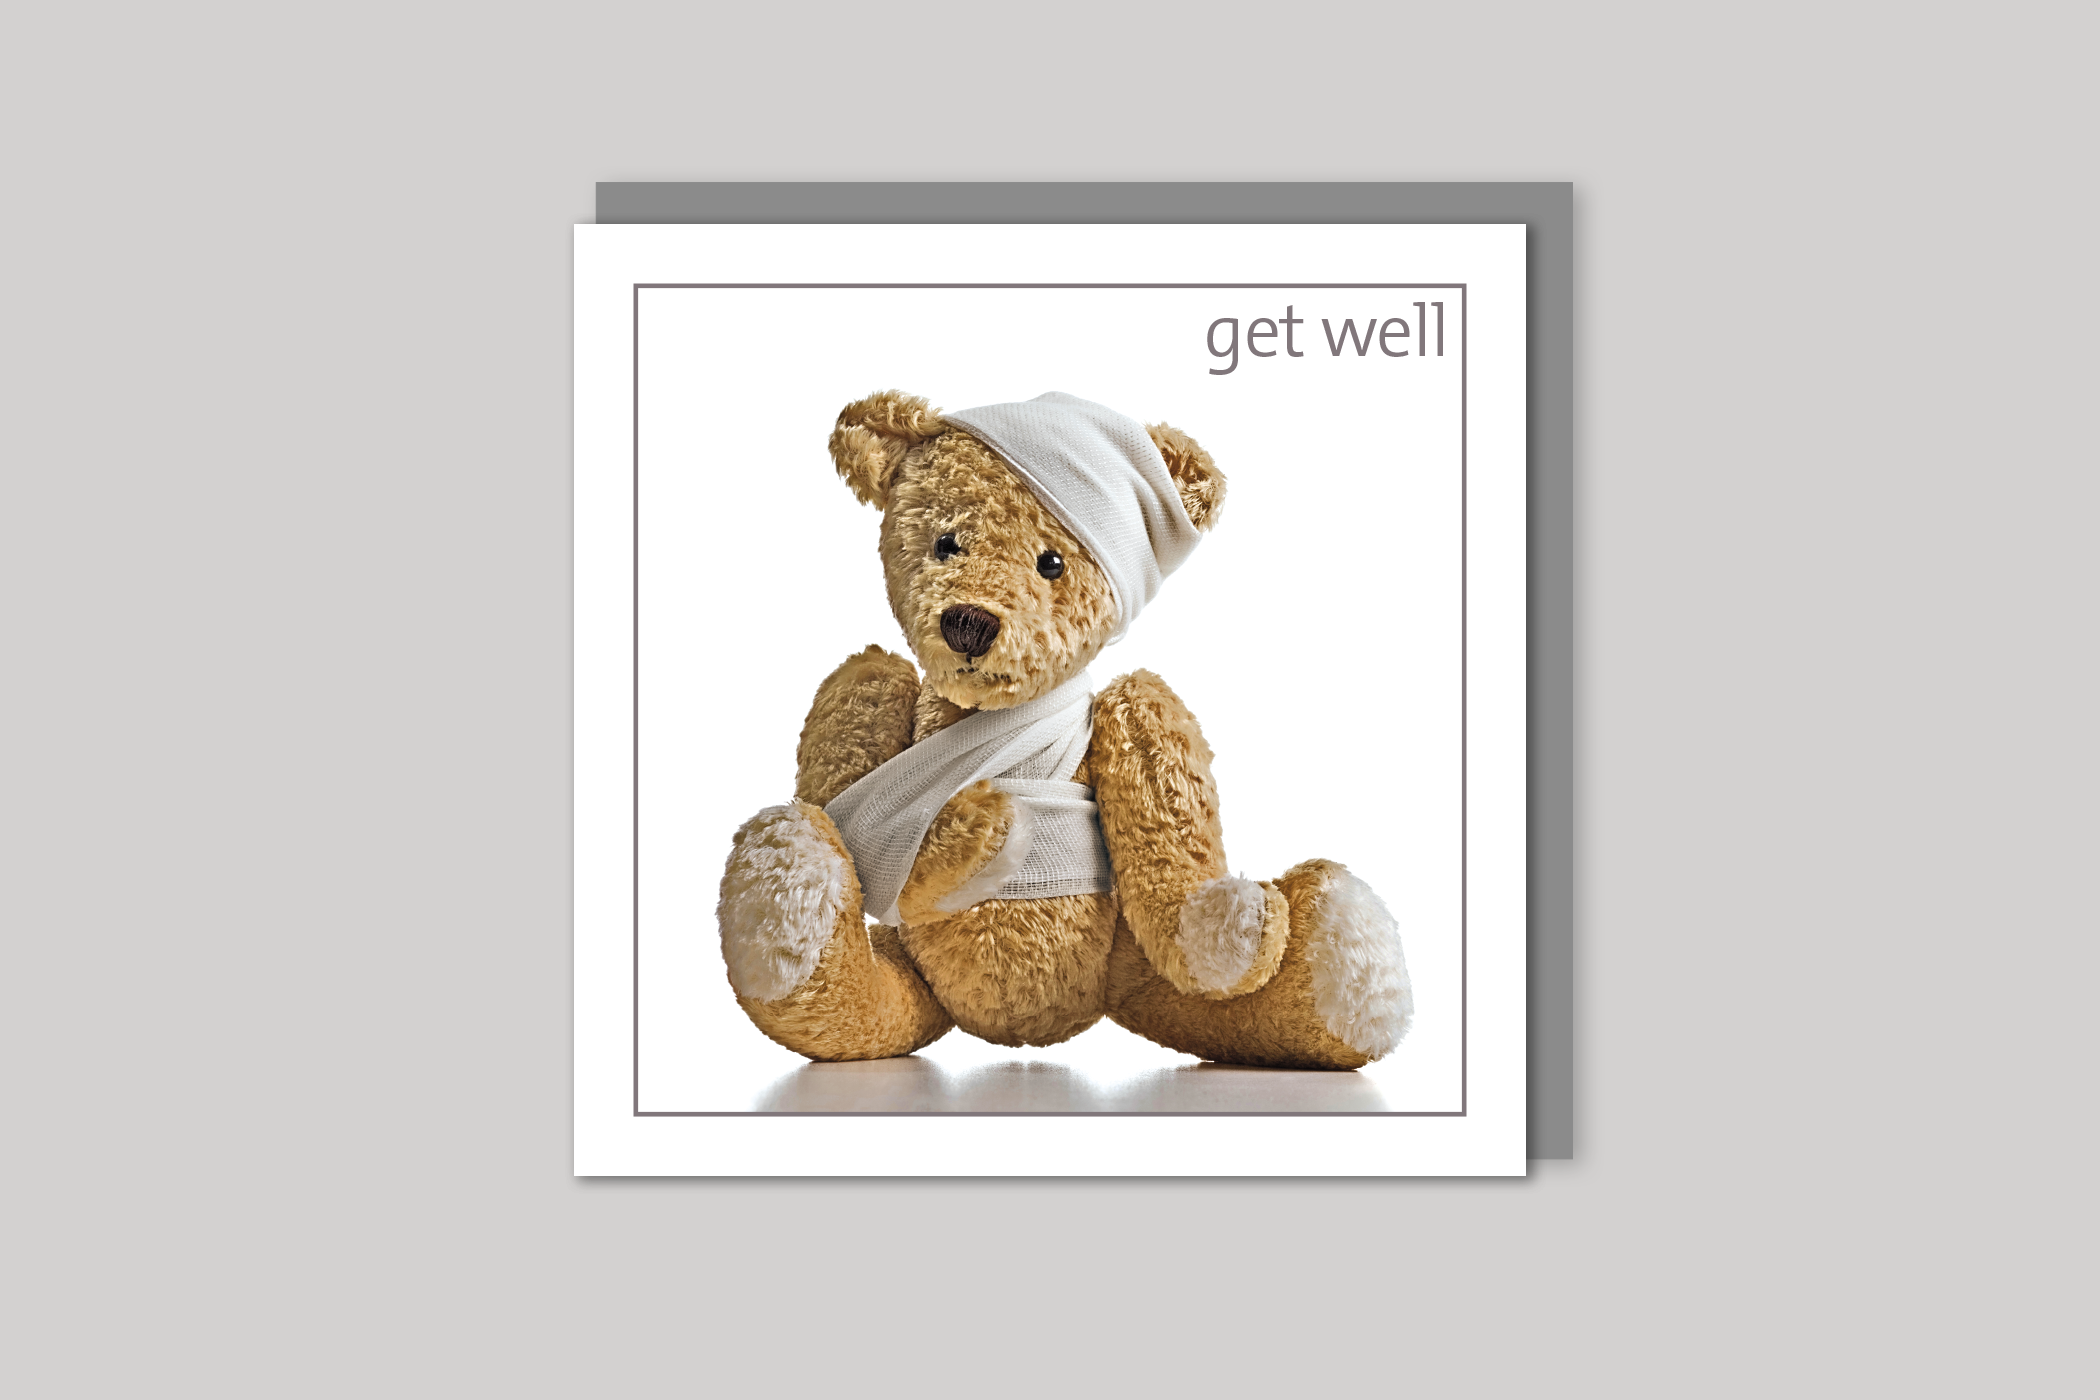 Teddy get well card from Exposure Silver Edition range of greeting cards by Icon, back page.